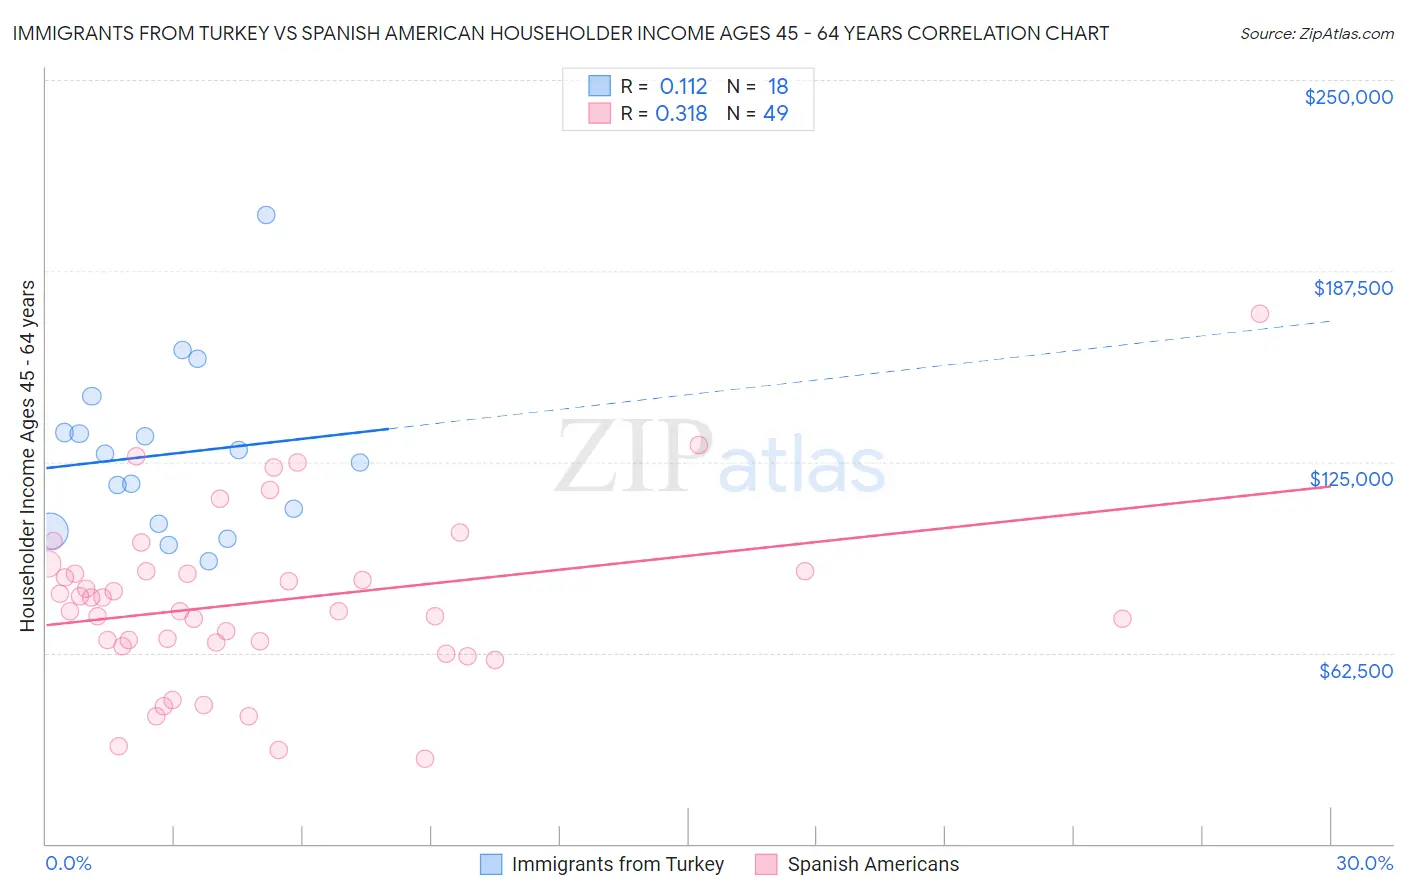 Immigrants from Turkey vs Spanish American Householder Income Ages 45 - 64 years